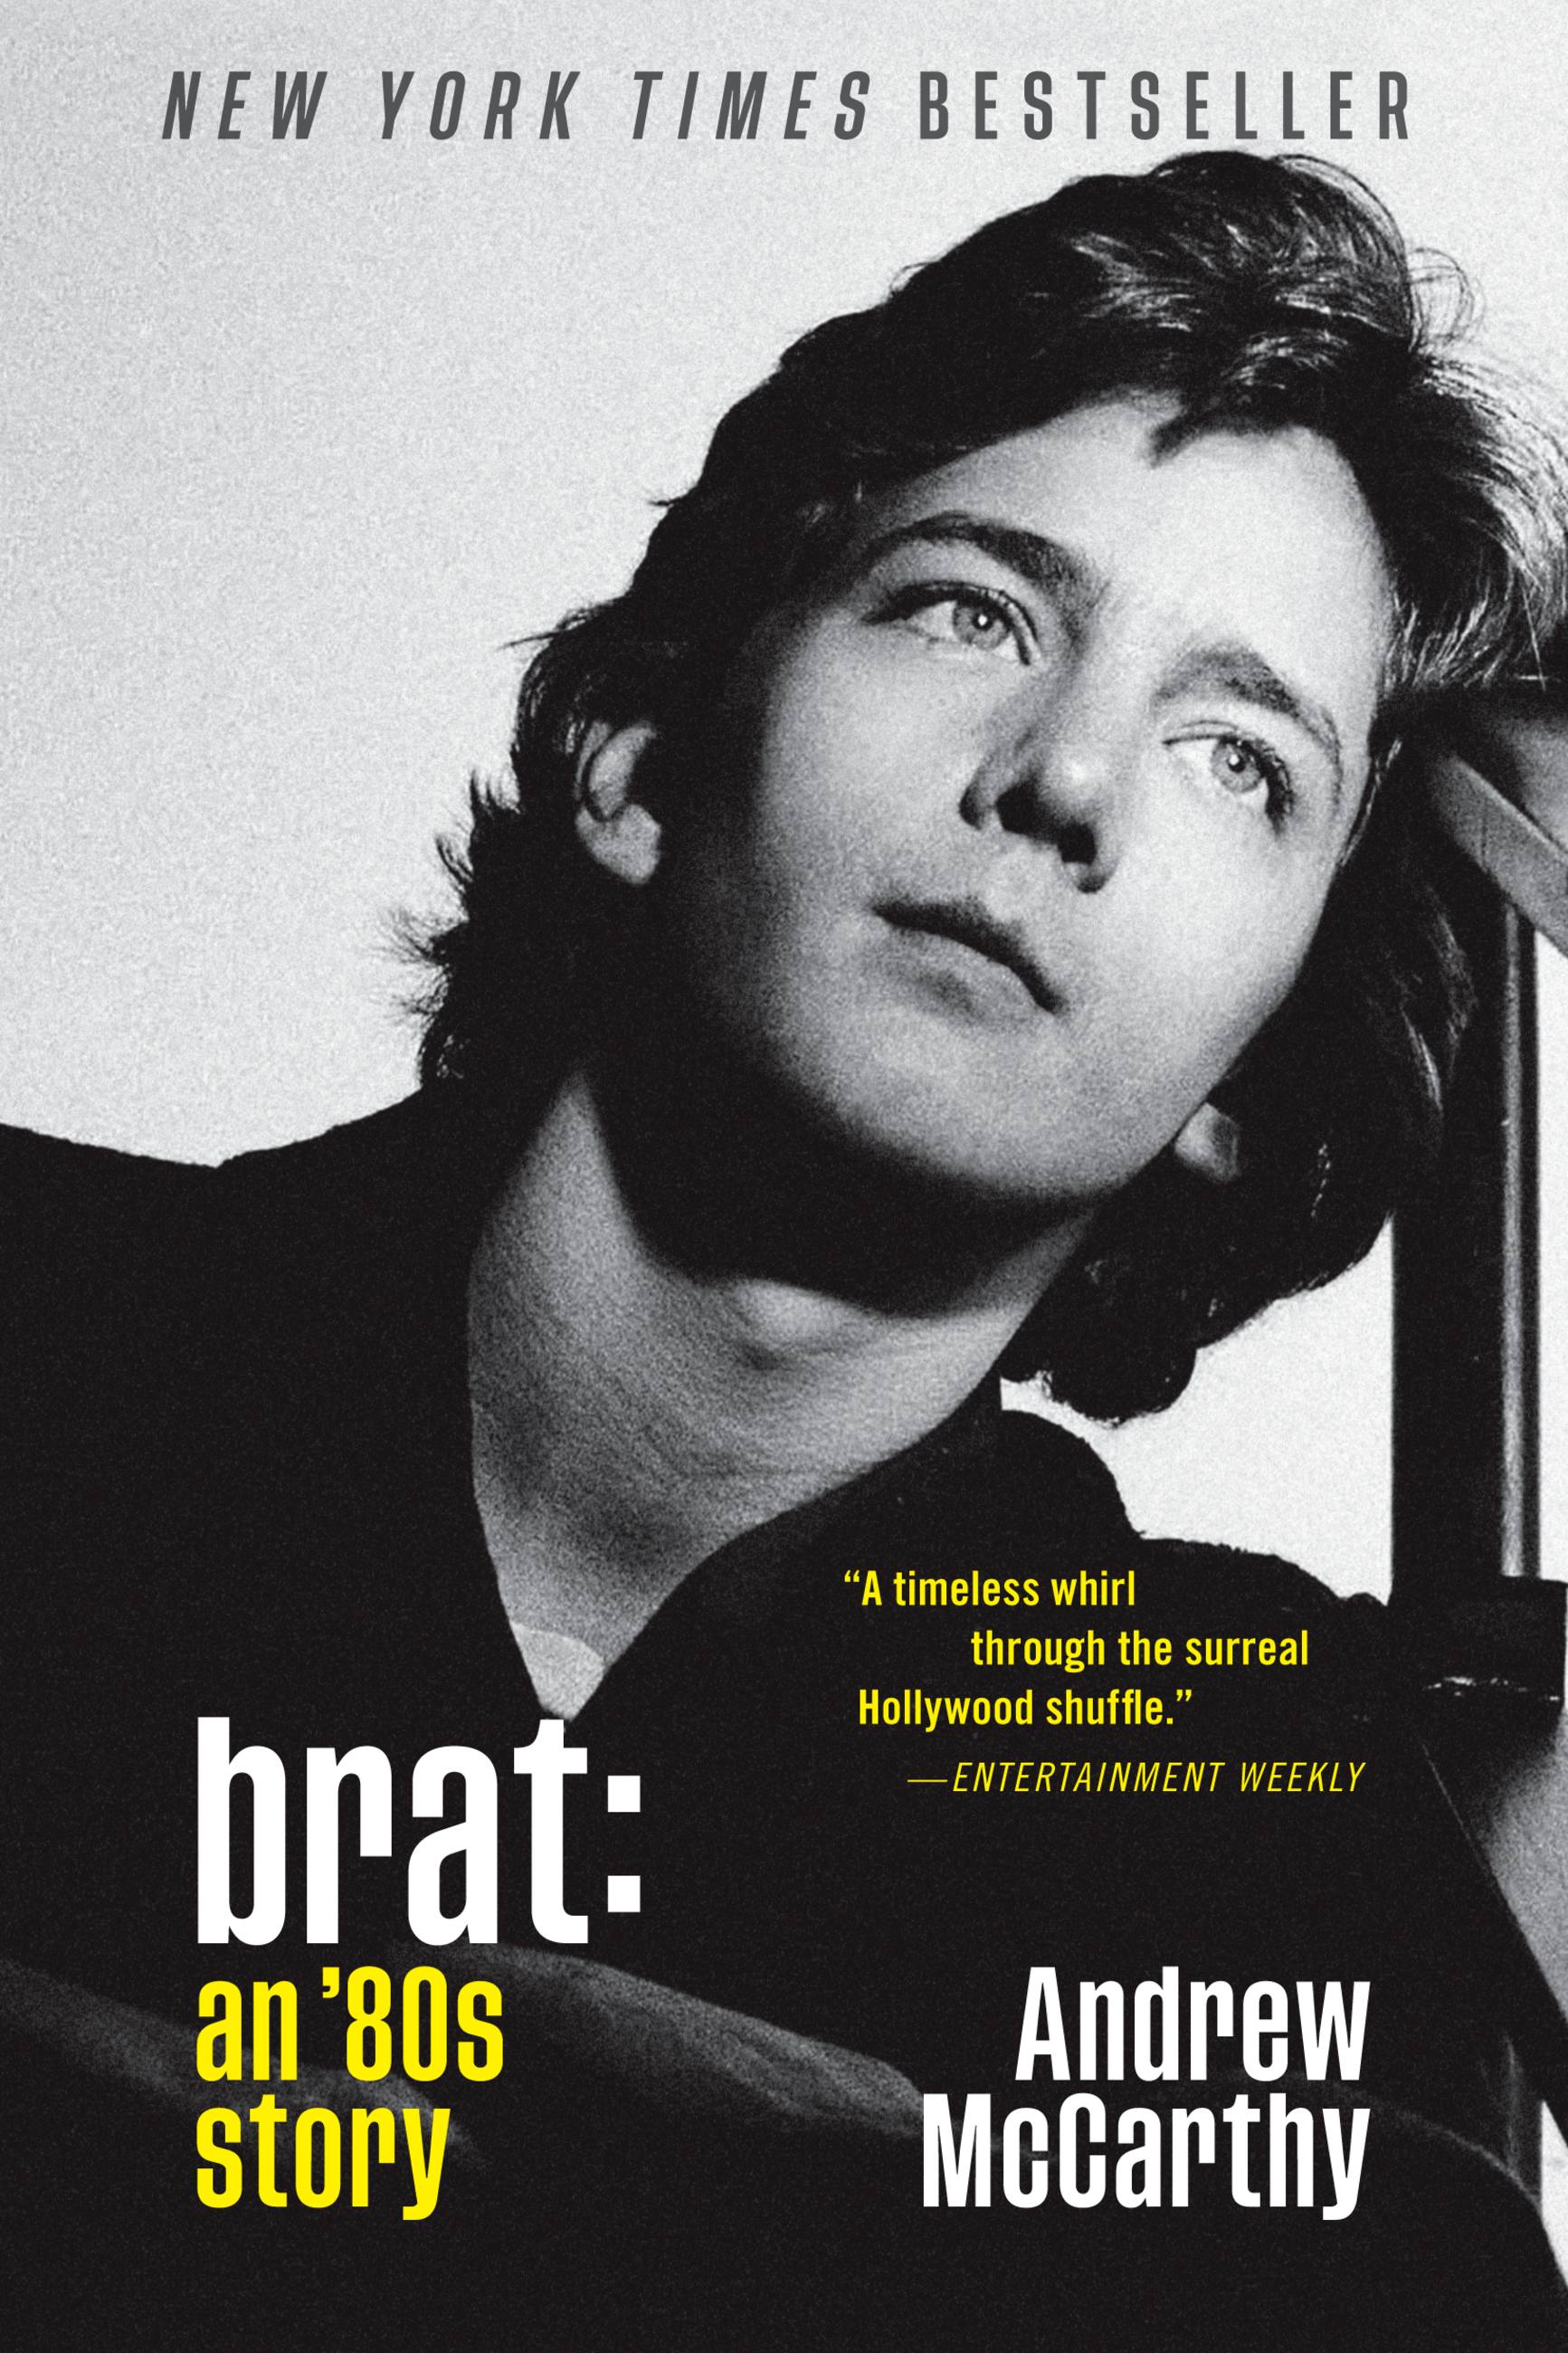 Brat by Andrew McCarthy Hachette Book Group